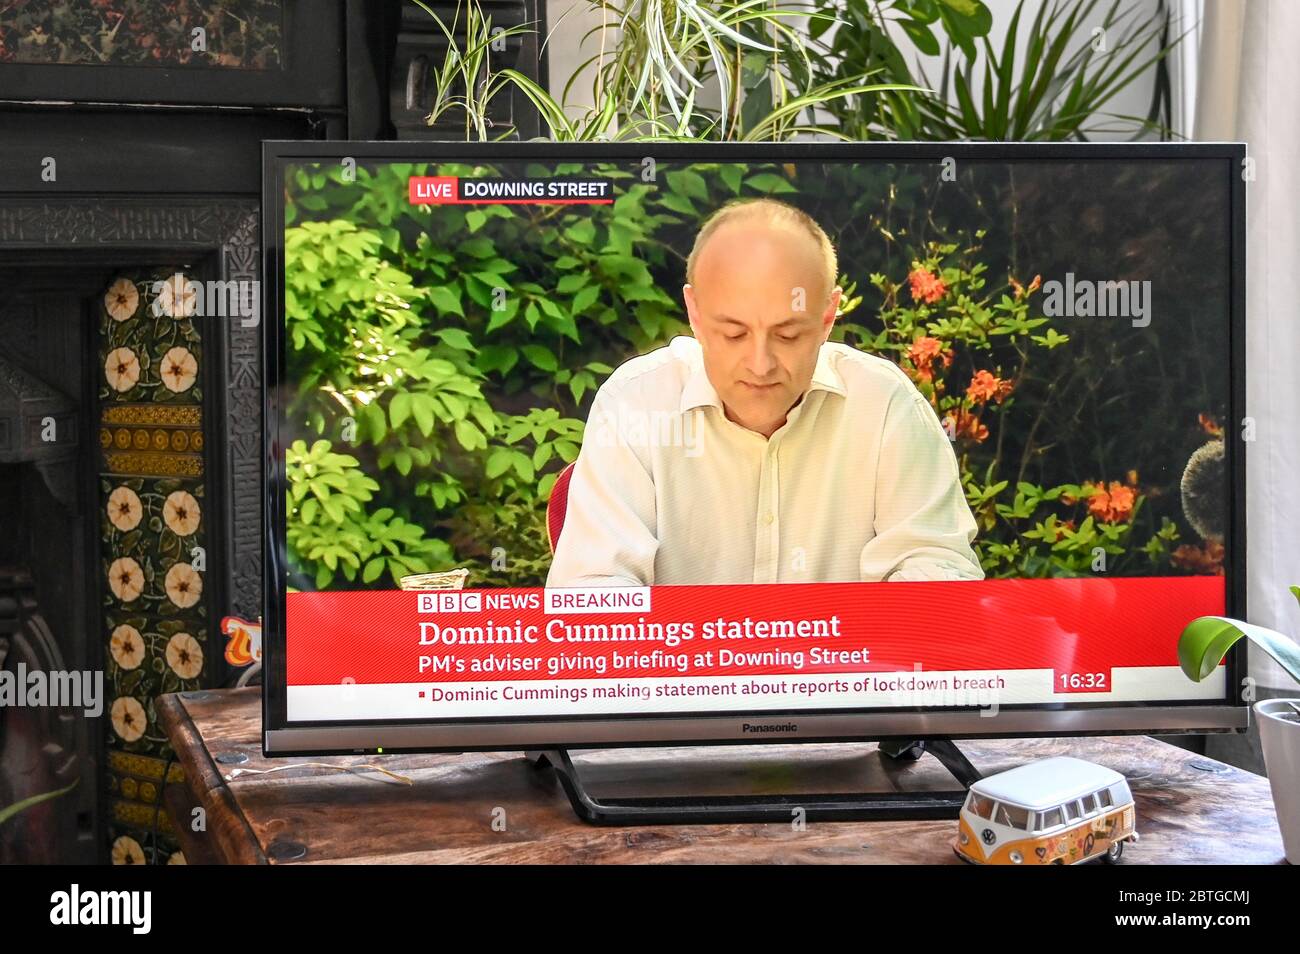 Dominic Cummings giving a televised press conference from the Downing Street rose garden after breaching the lockdown during the Coronavirus pandemic. Stock Photo